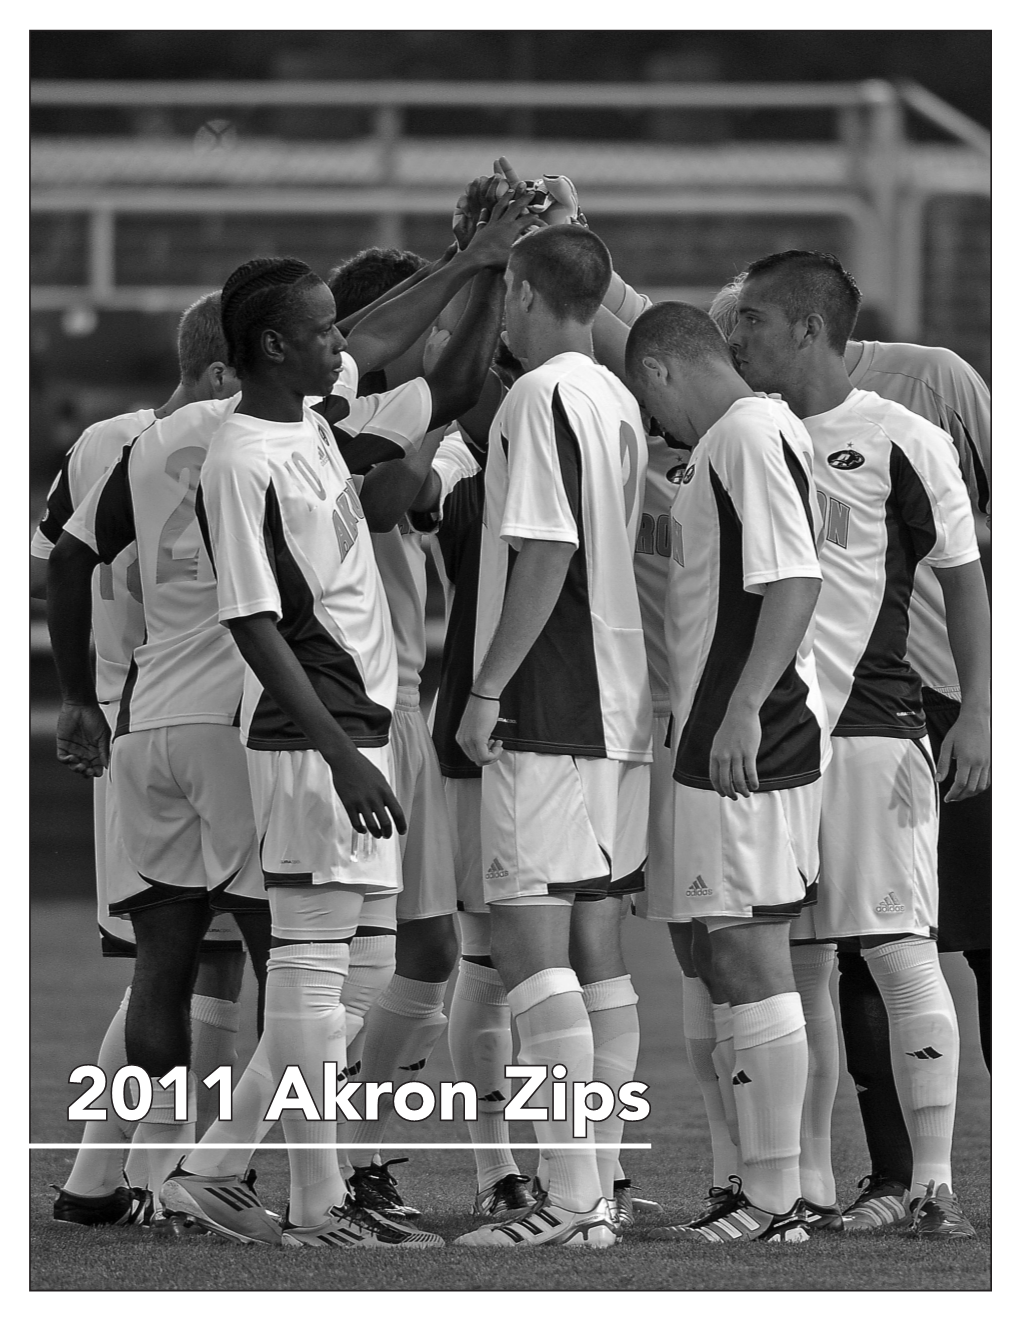 2011 Akron Zips AKRON ZIPS 2011 AKRON ZIPS AKRON SOCCER STAFF STUDENT-ATHLETES SEASON OUTLOOK 2010 REVIEW RECORDS